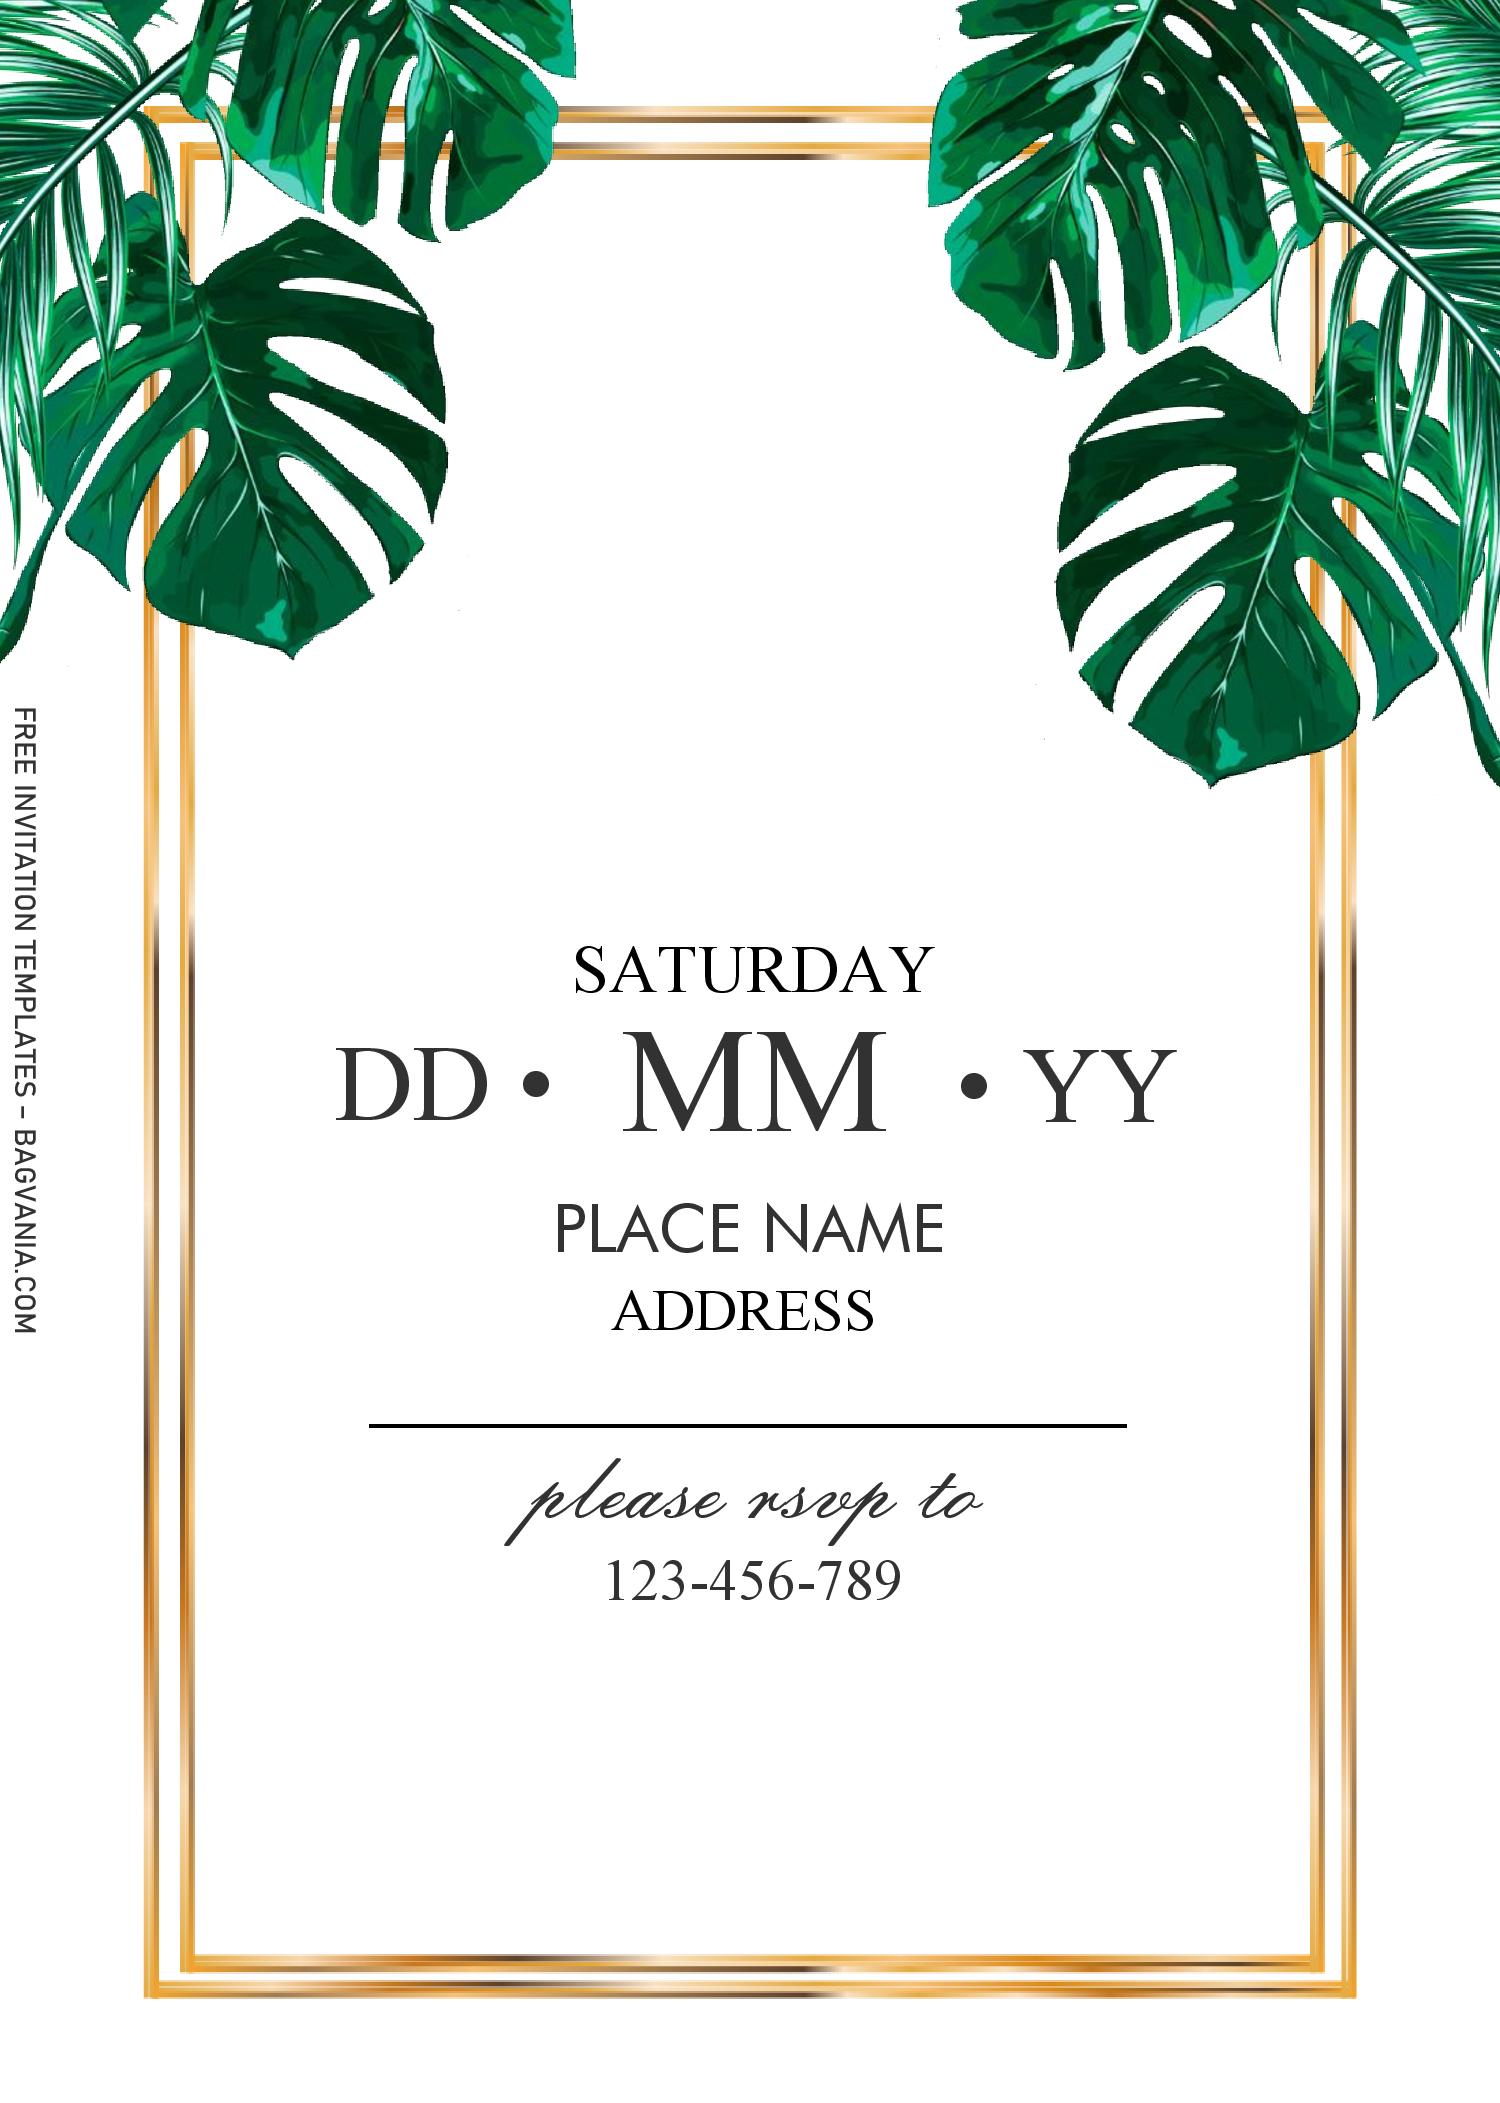 party-invitation-template-word